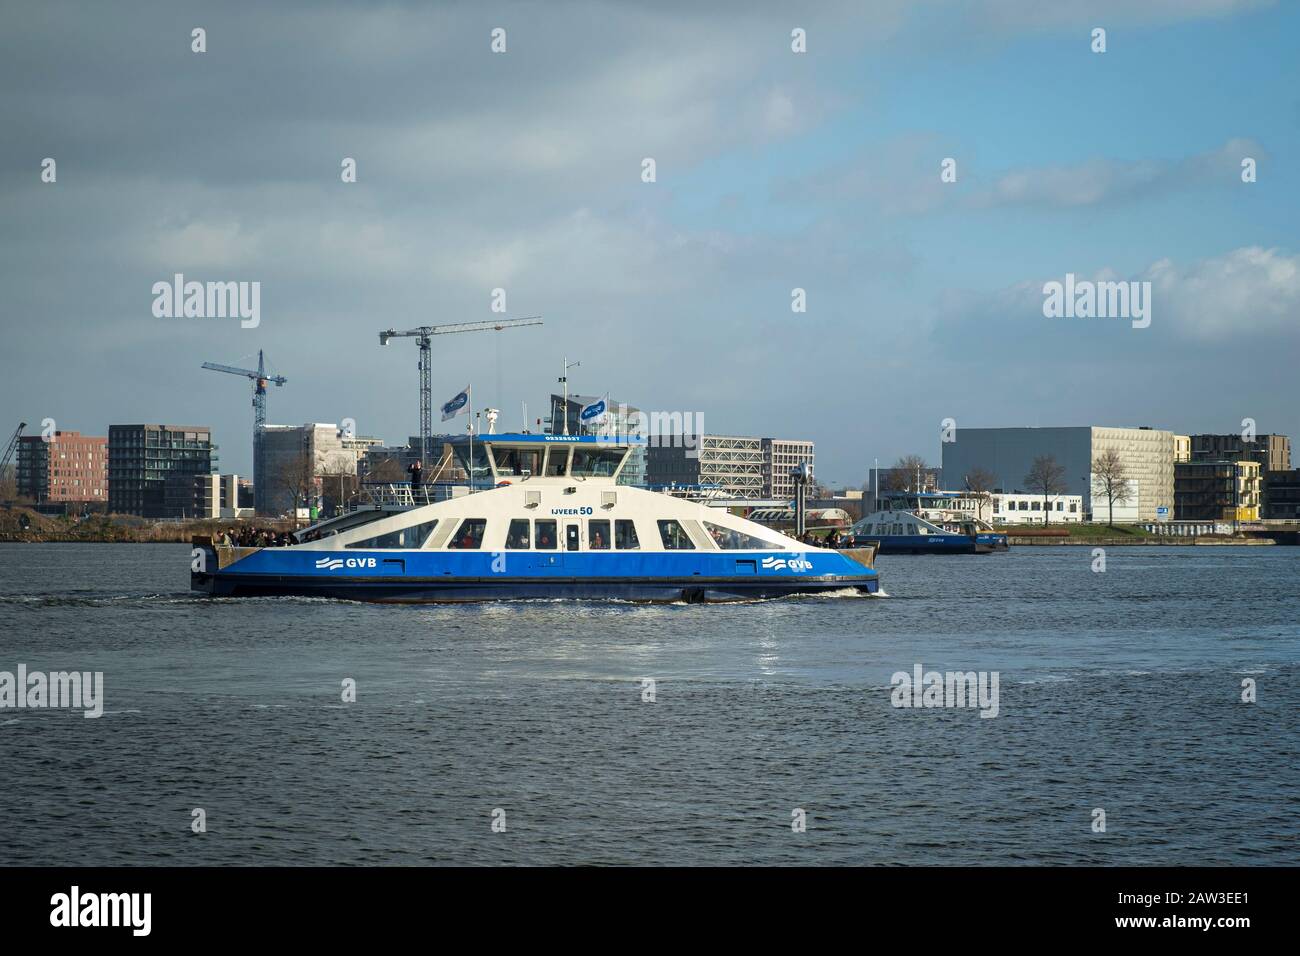 Ferries carrying passengers between Amsterdam and Amsterdam Noord (North). Stock Photo